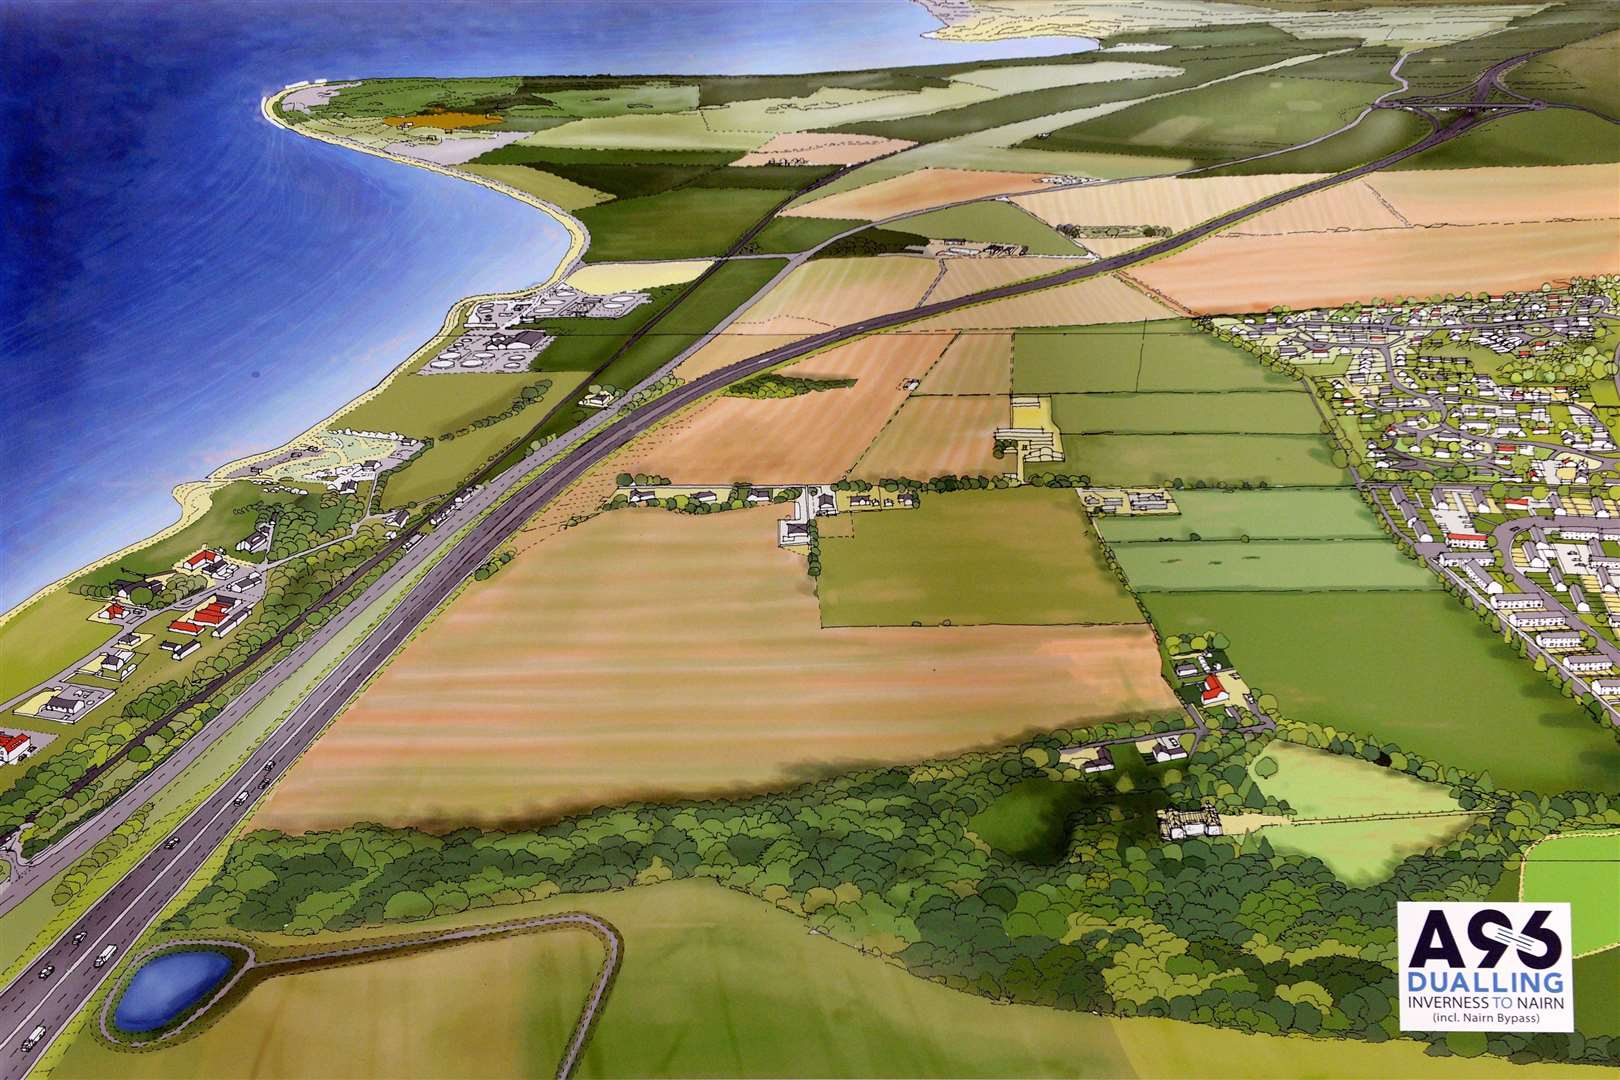 Plans for new road-building in the north and north-east include dualling the A96 between Inverness and Nairn.